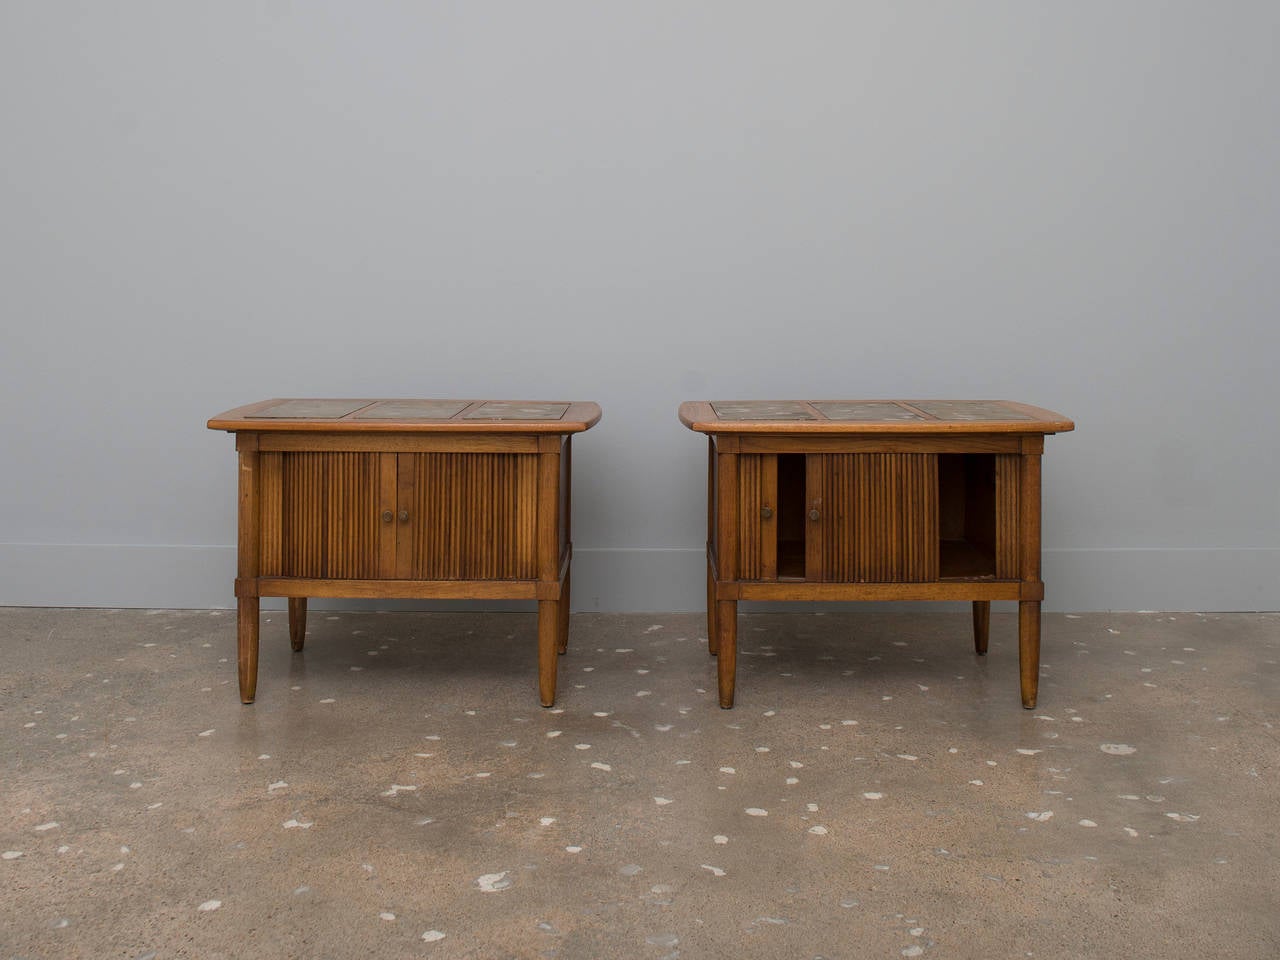 A pair of beautiful wood side tables with granite inlay design on top and tambour doors.